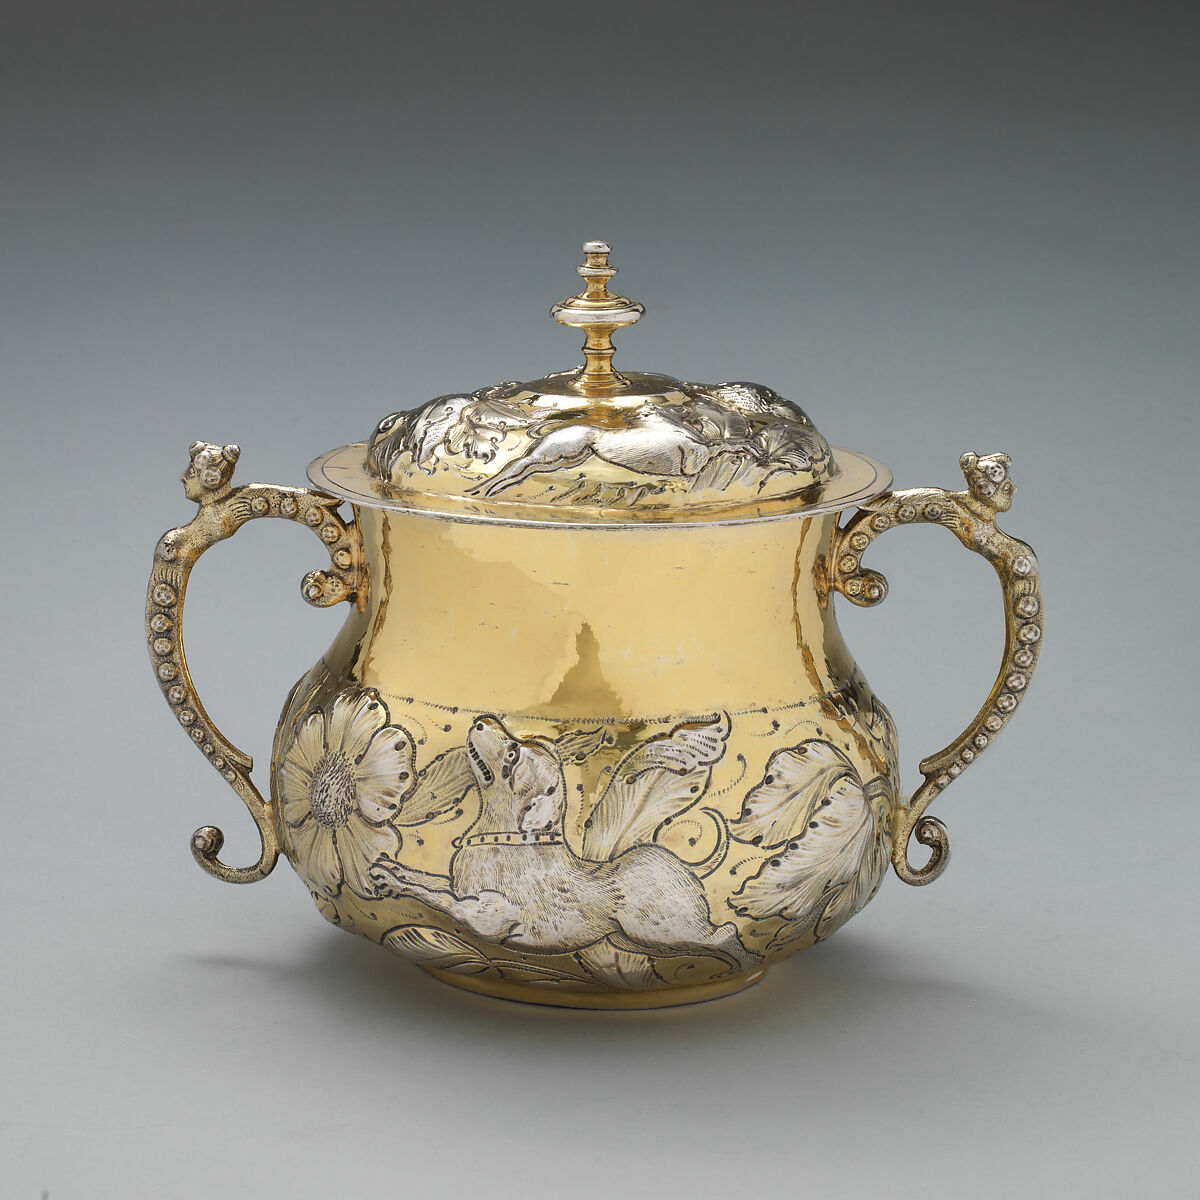 Two-handled cup with cover, Francis Leake (active 1655–83), Silver gilt, British, London 